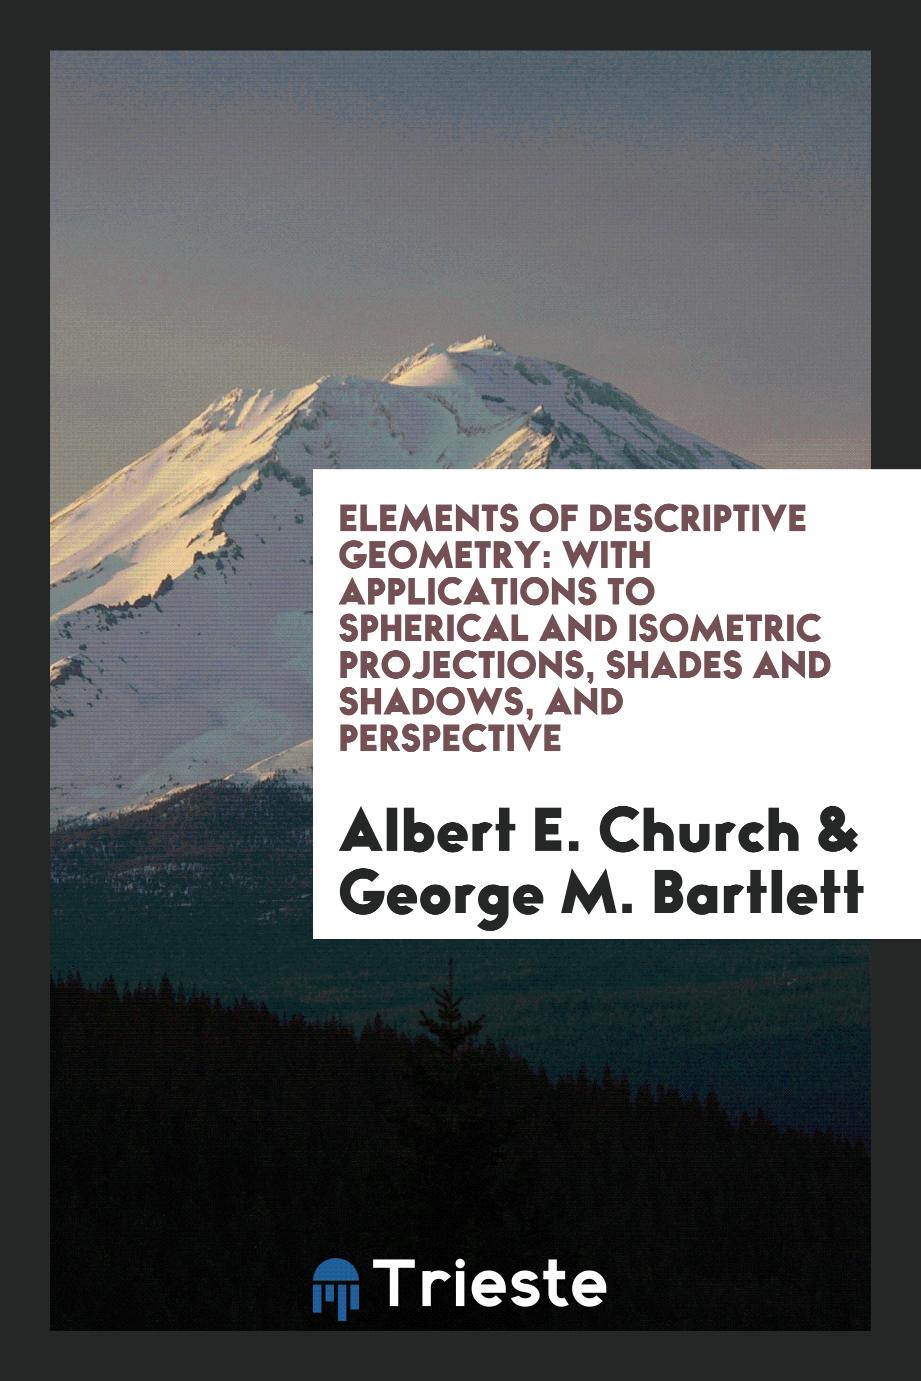 Elements of Descriptive Geometry: With Applications to Spherical and Isometric Projections, Shades and Shadows, and Perspective